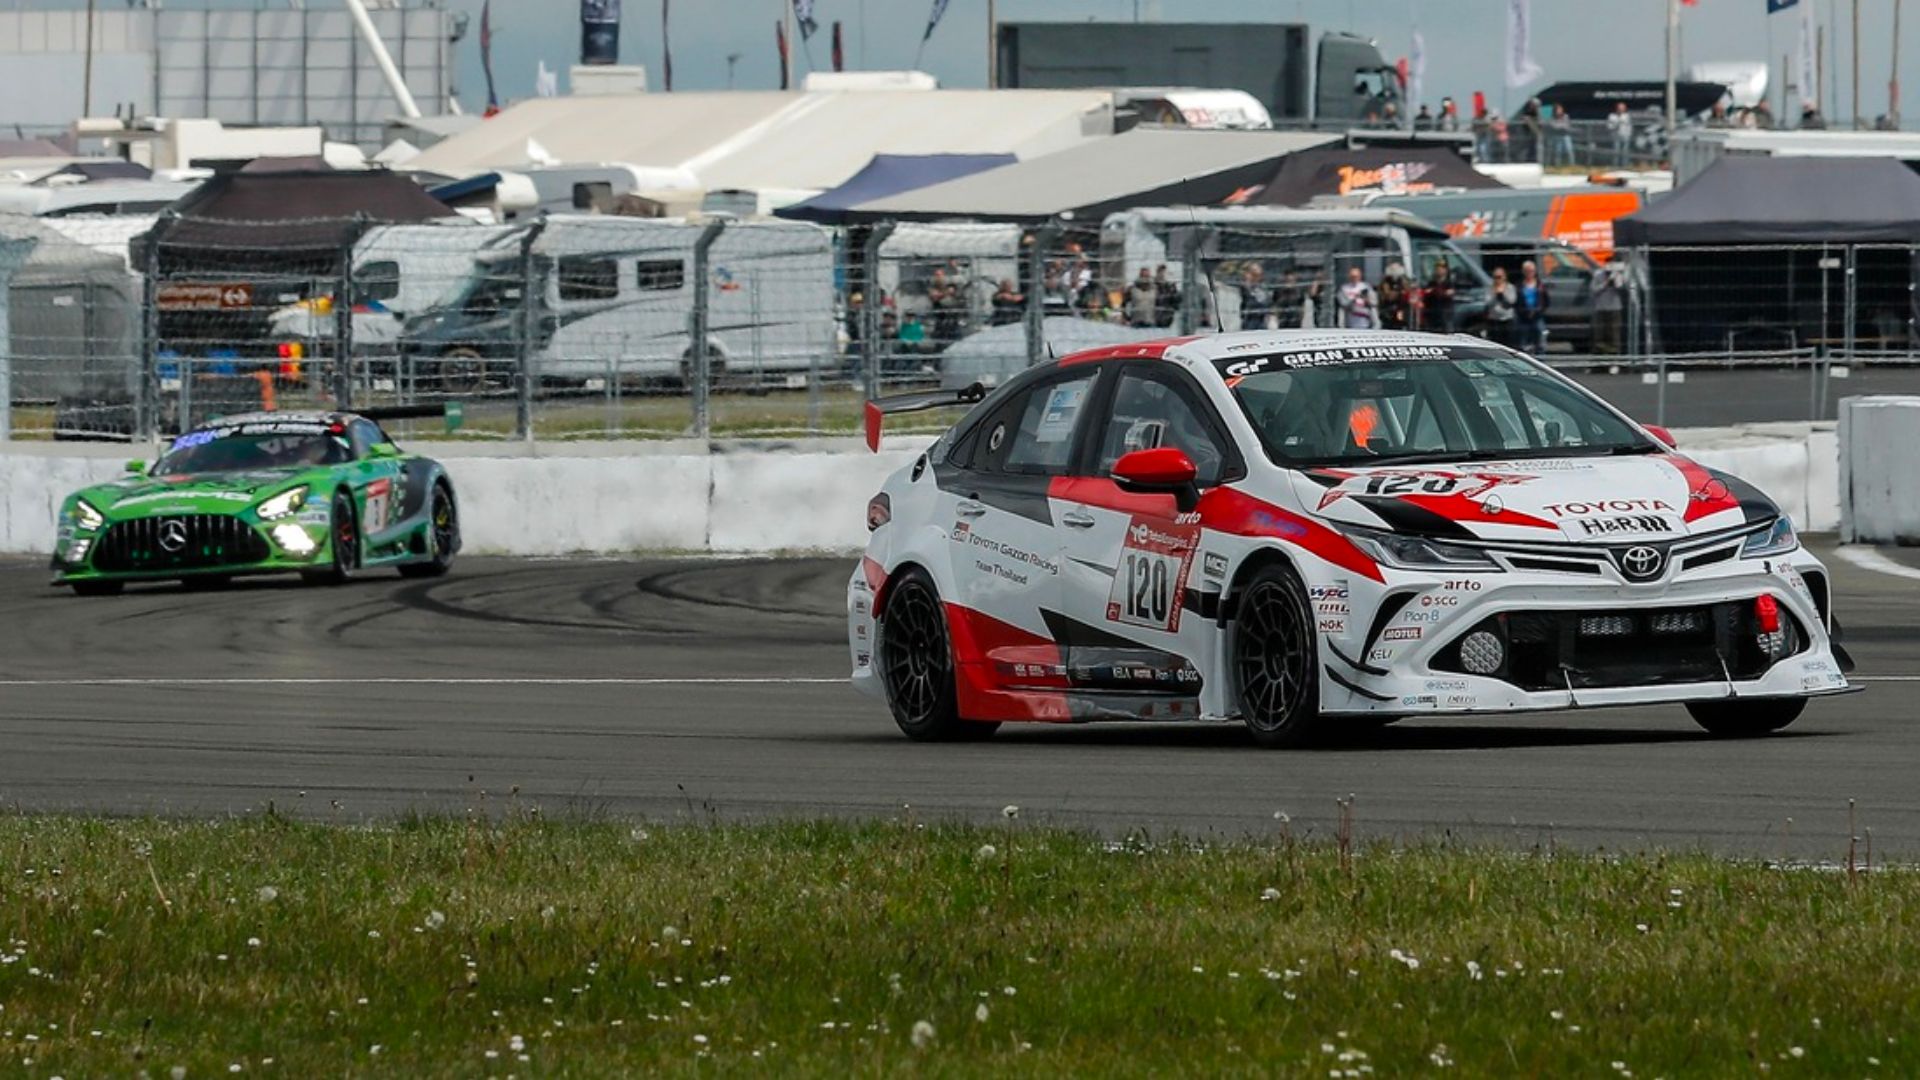 Toyota Corolla Altis in Nurburgring 24 Hours